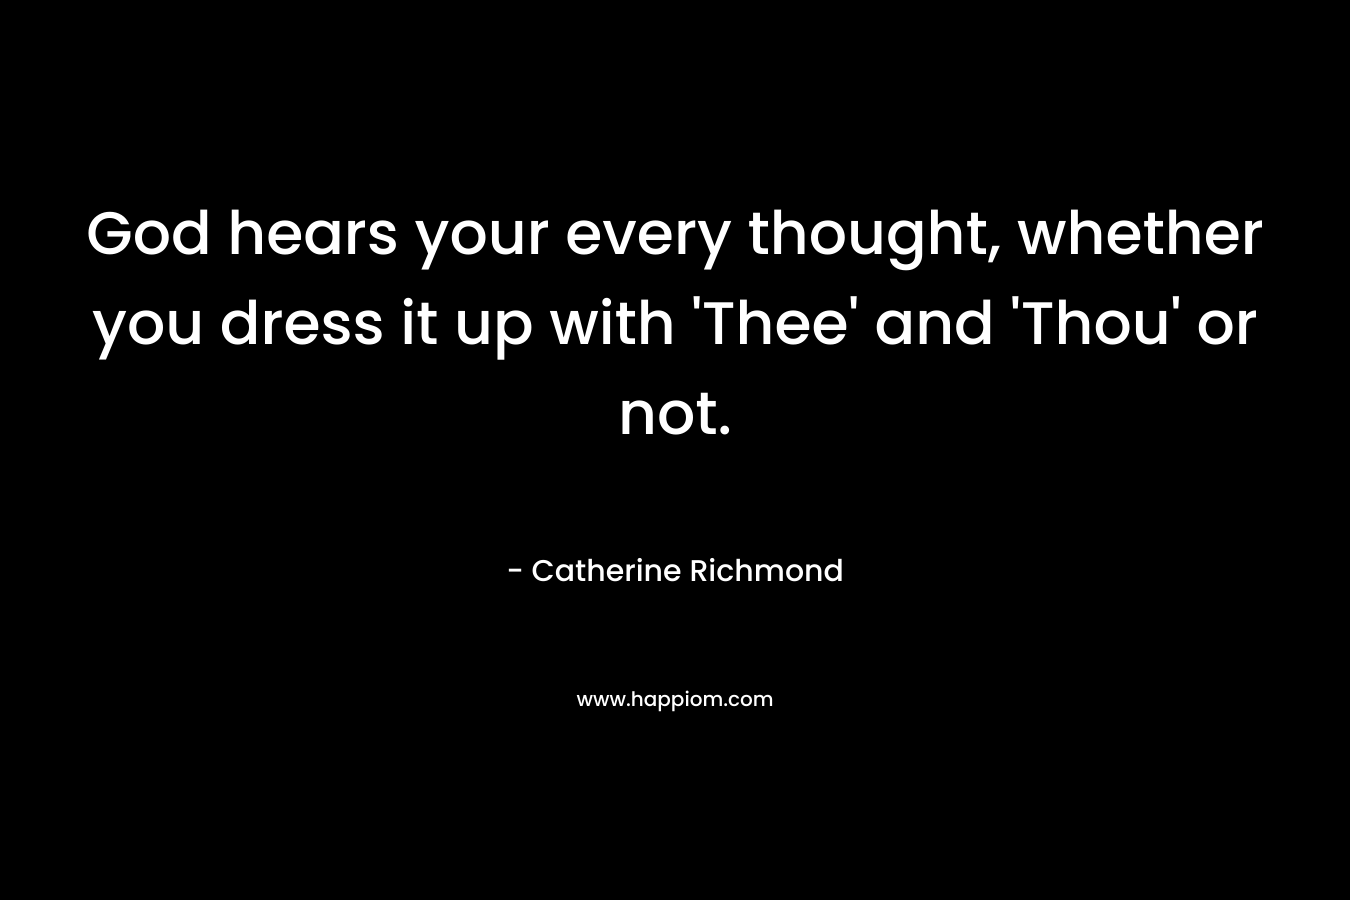 God hears your every thought, whether you dress it up with 'Thee' and 'Thou' or not.